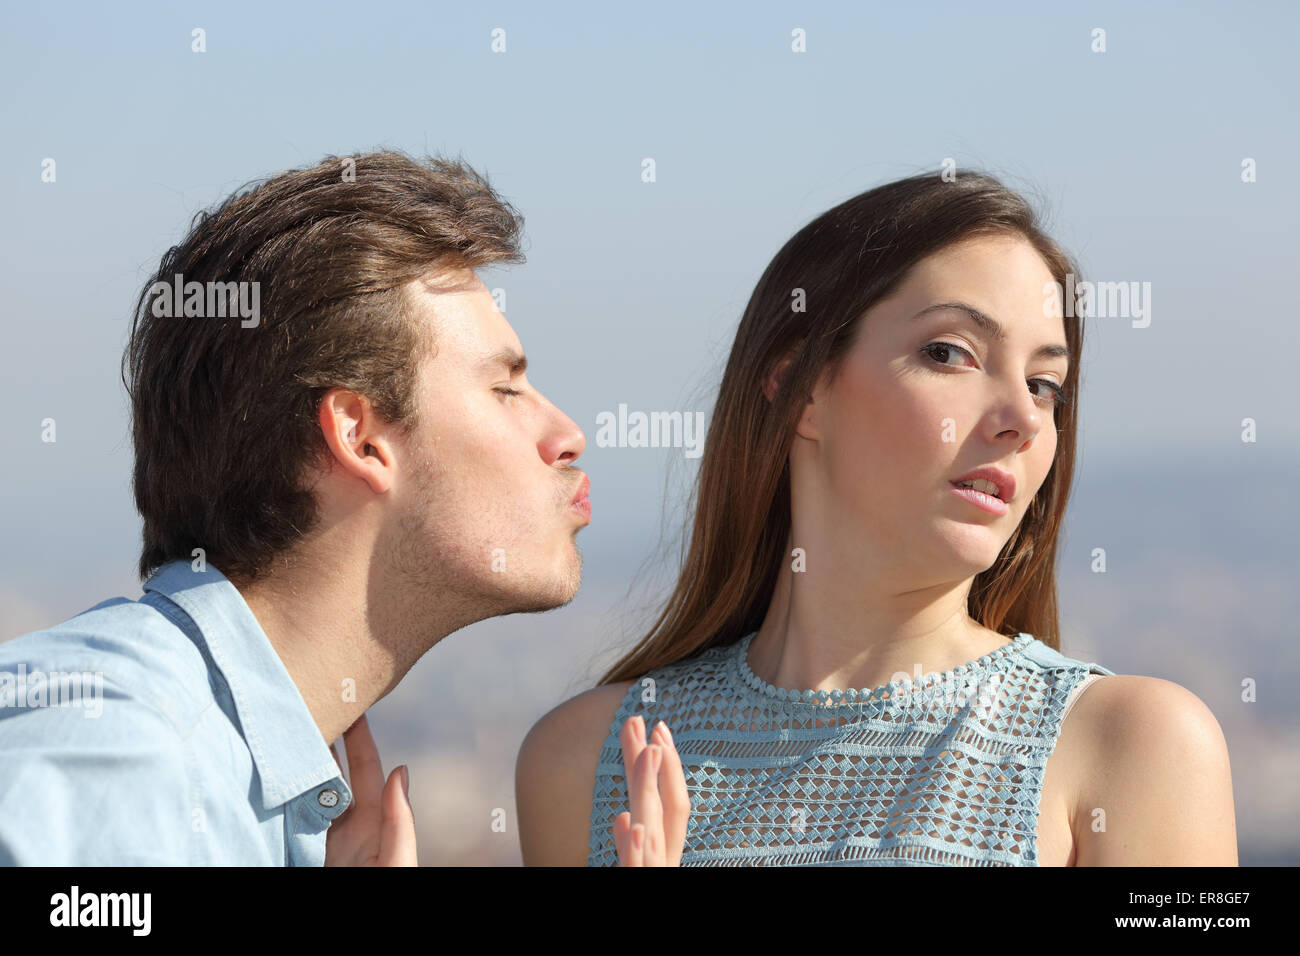 Friend zone concept with a man trying to kiss a woman and she rejecting him Stock Photo